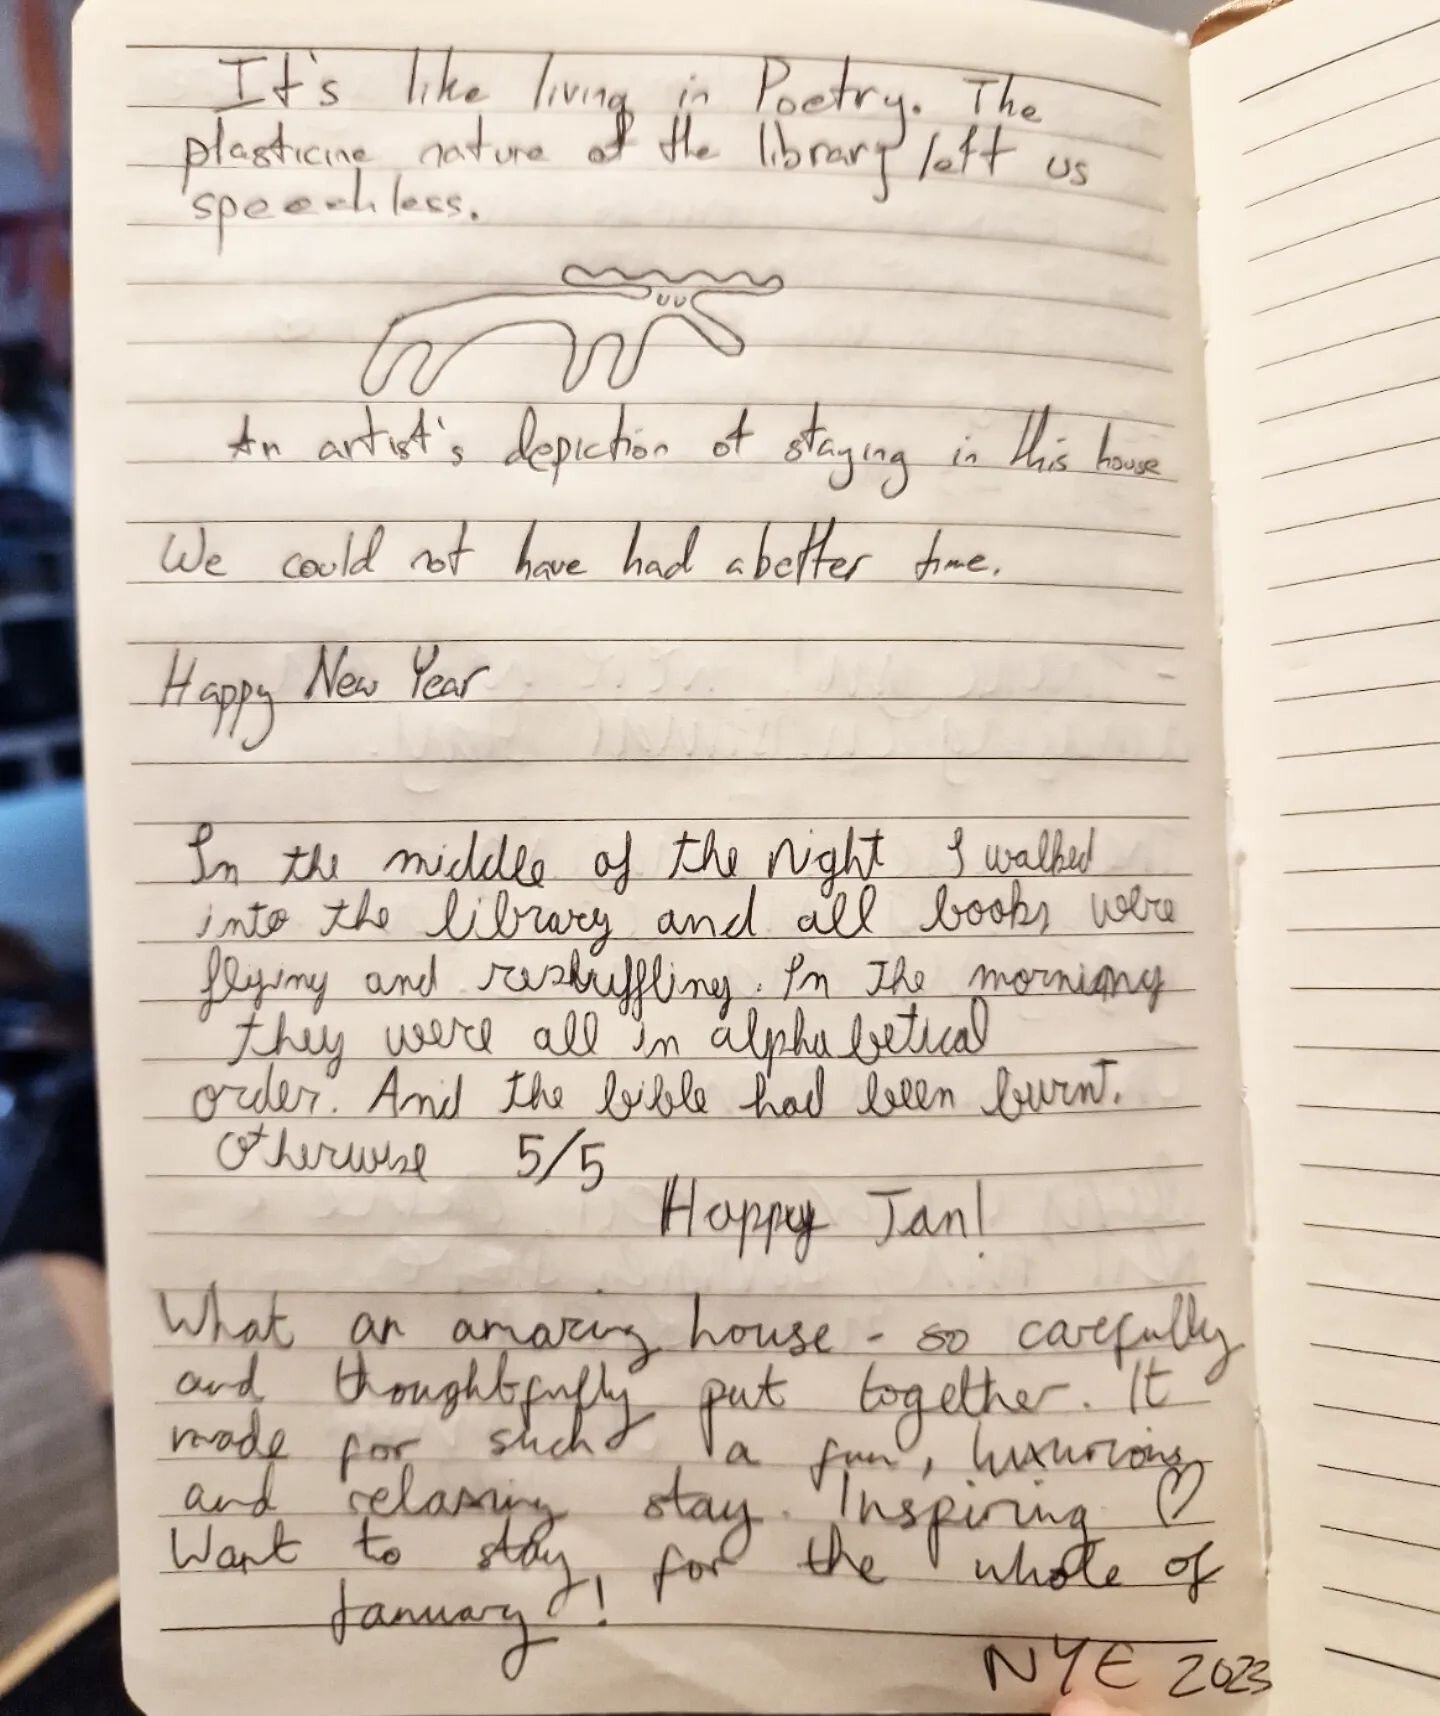 One of the treats of this place is seeing what our guests have written in the book at the end of their stay. I fully approve of this level of imagination and surreality! 
Sometimes I think the library can be missed by our visitors, because there's fi